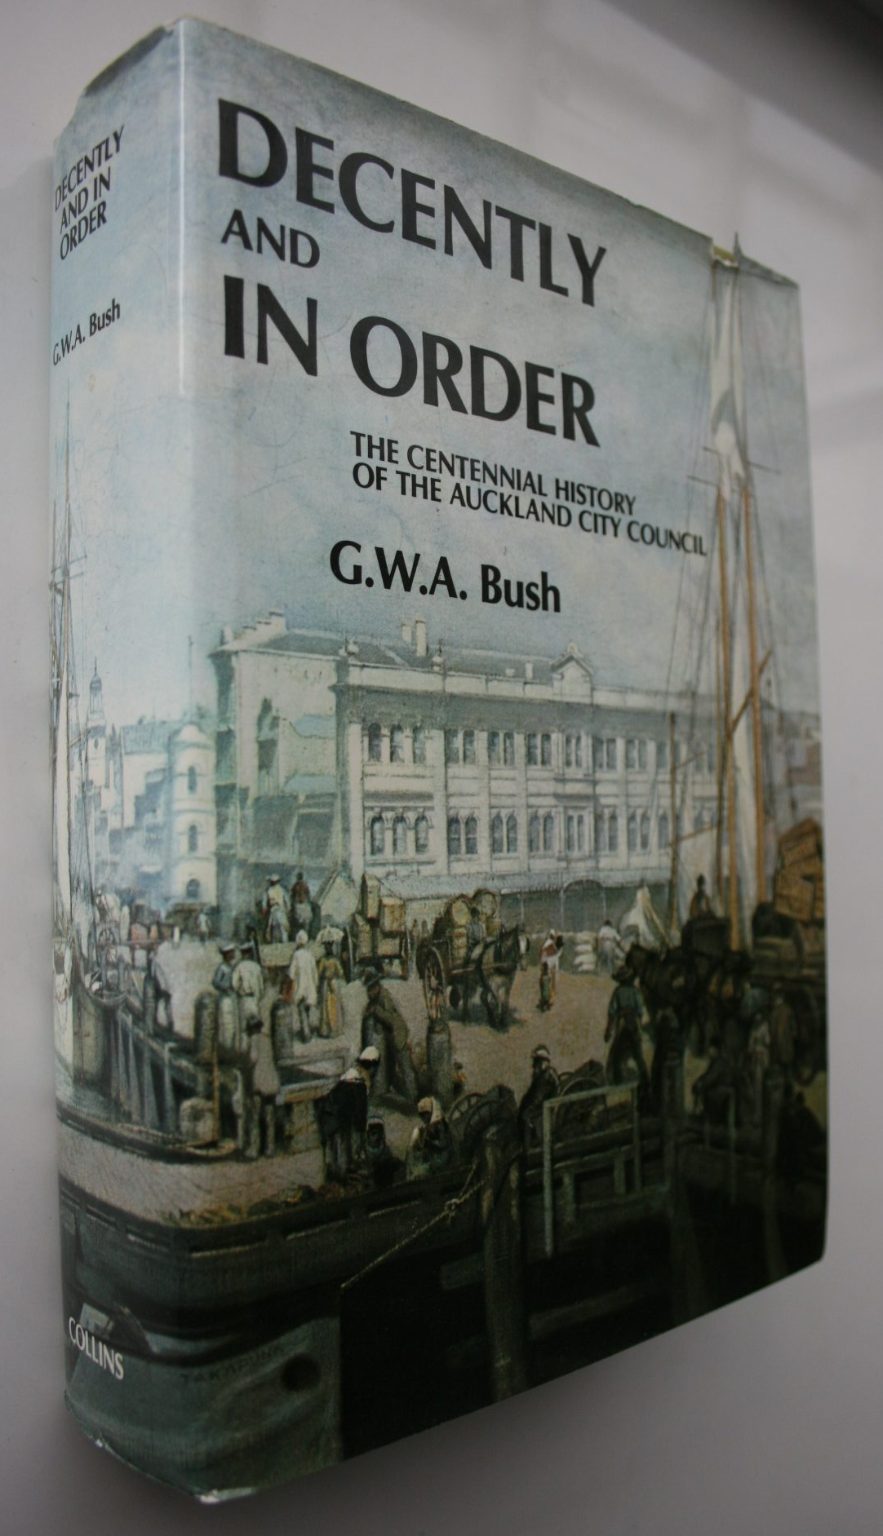 Decently And in Order - the Centennial History of the Auckland City Council. By G.W.A. Bush.